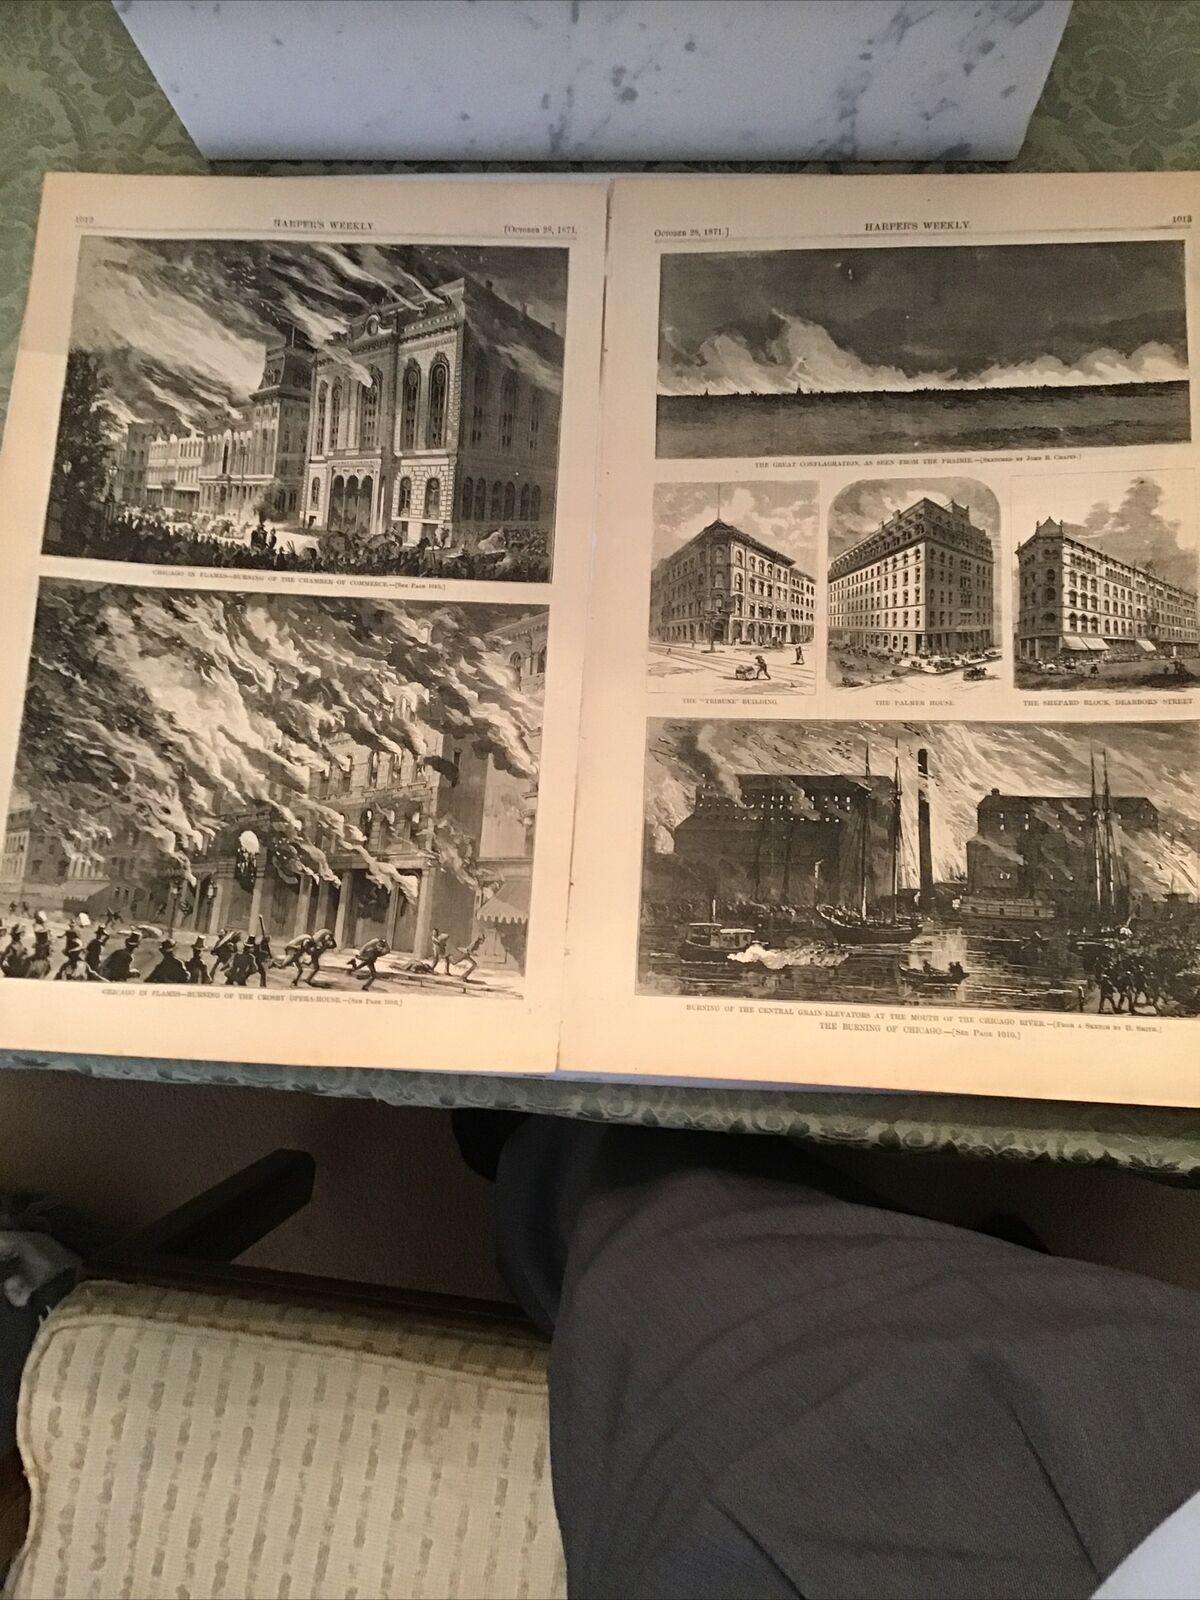 Chicago In Flames pp1012 1013 Harper Weekly October 28, 1871 Chamber of Commerce